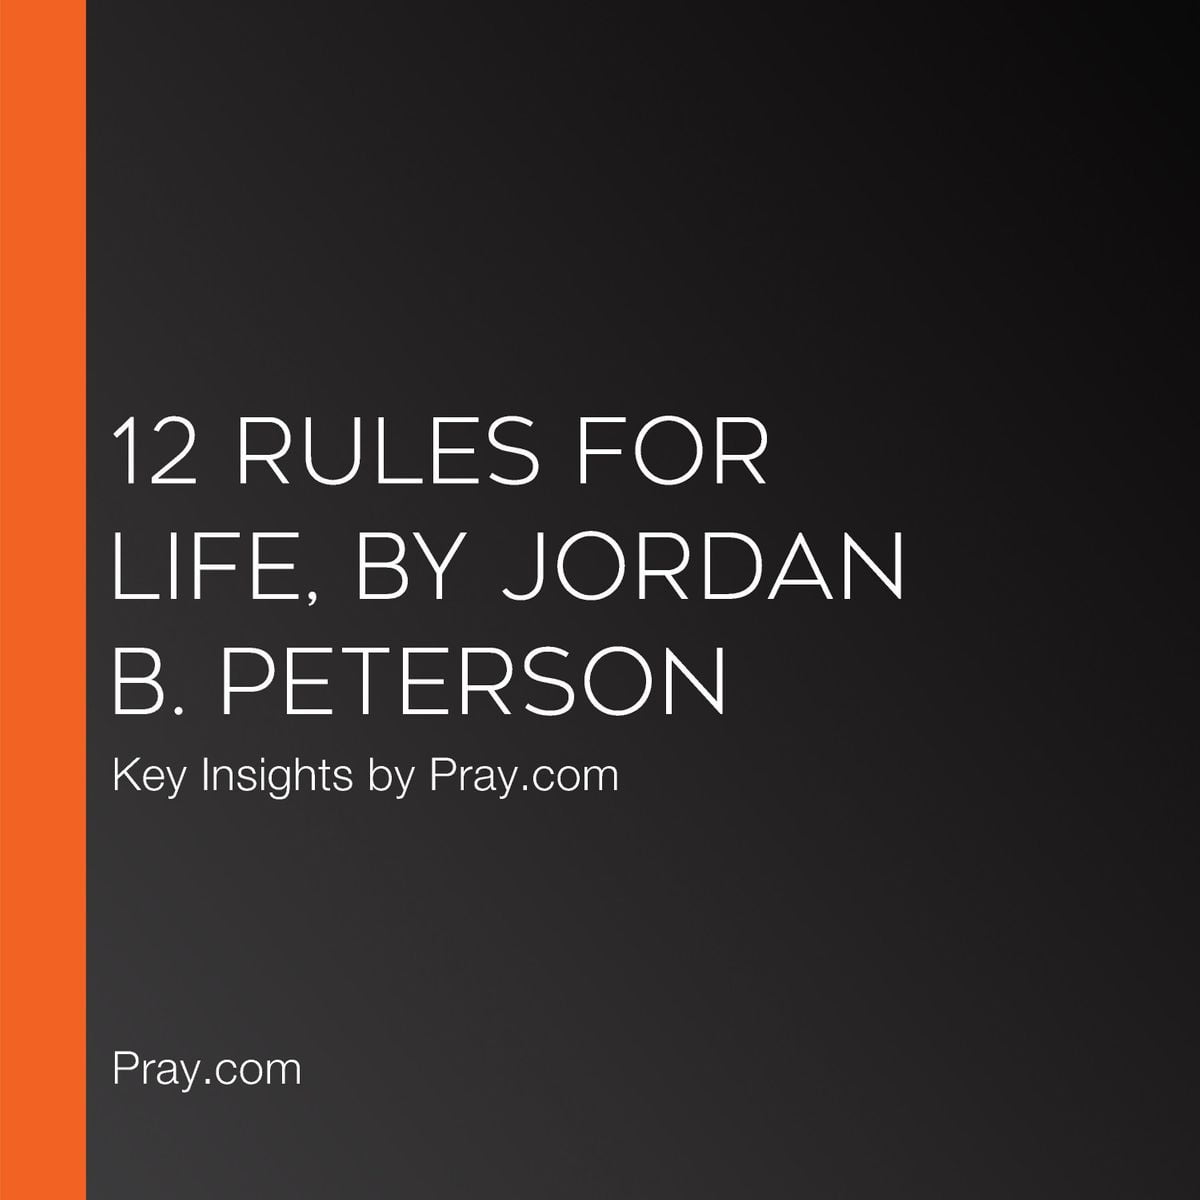 12 rules for life audiobook itunes